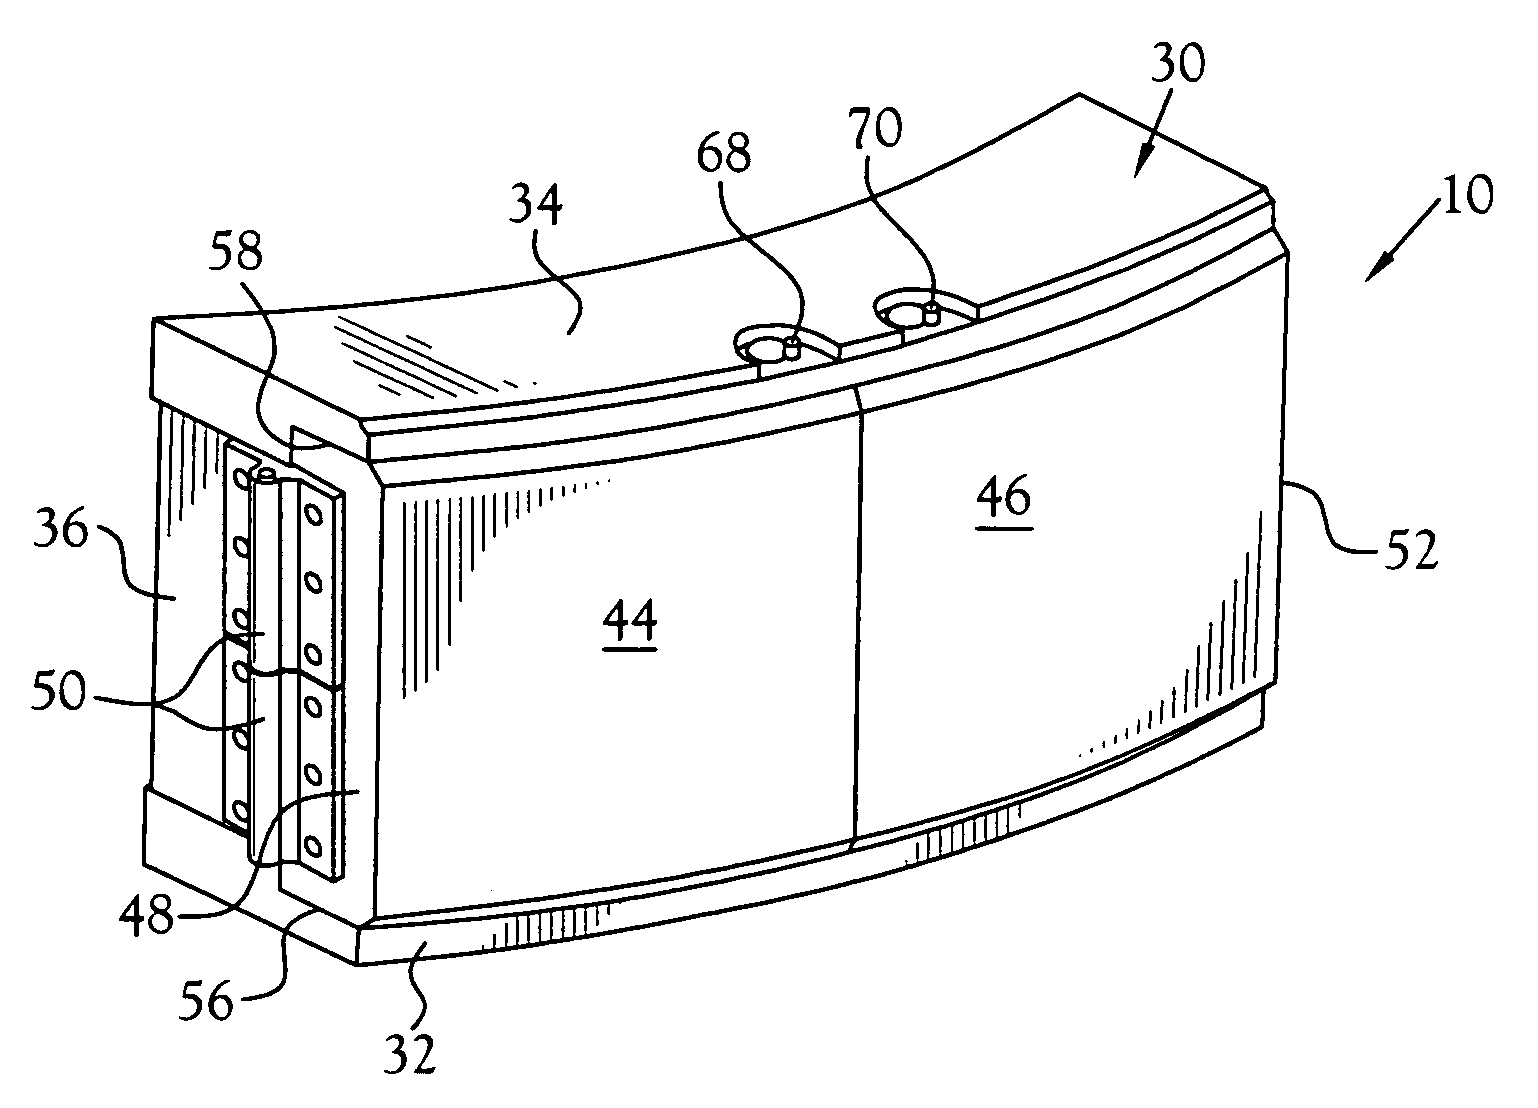 Closure for shielding the targeting assembly of a particle accelerator